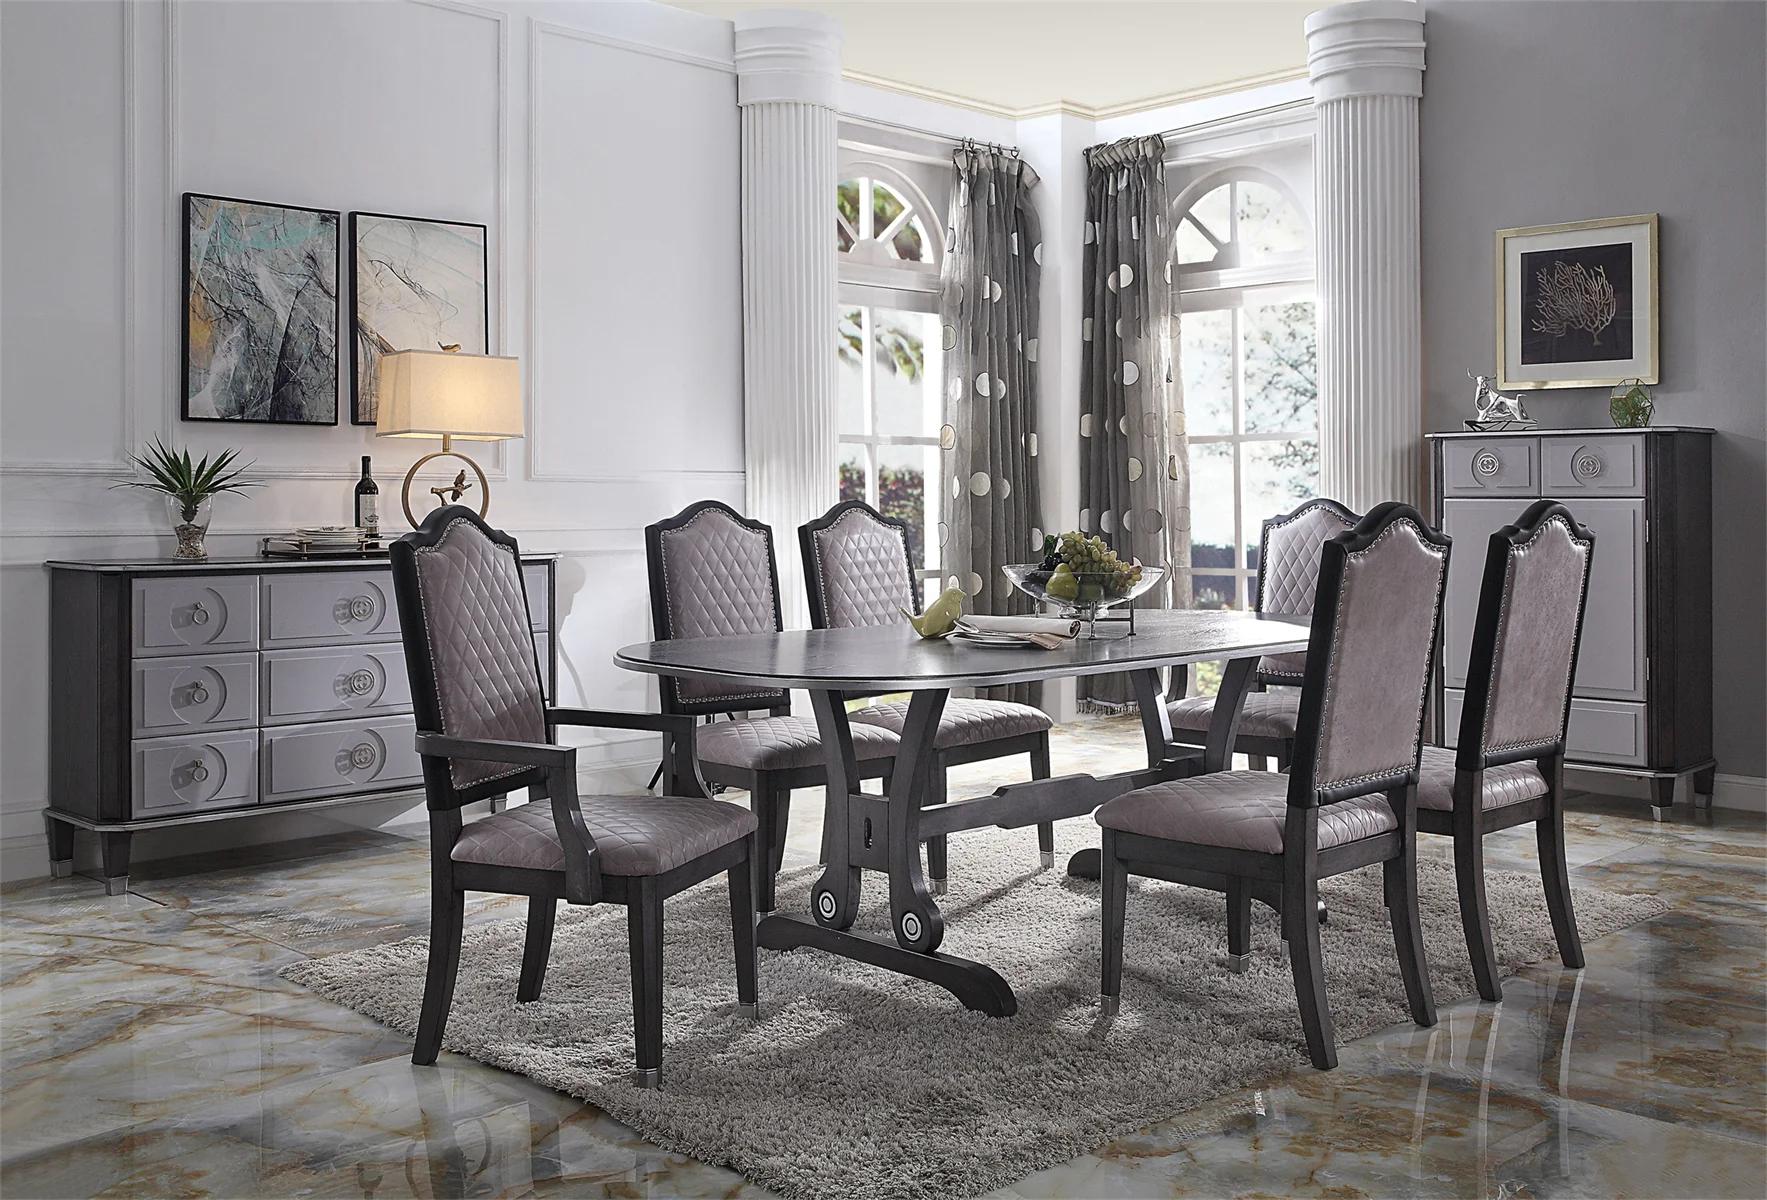 

    
Transitional Charcoal Dining Table + 6x Chairs by Acme House Beatrice 68810-7pcs
